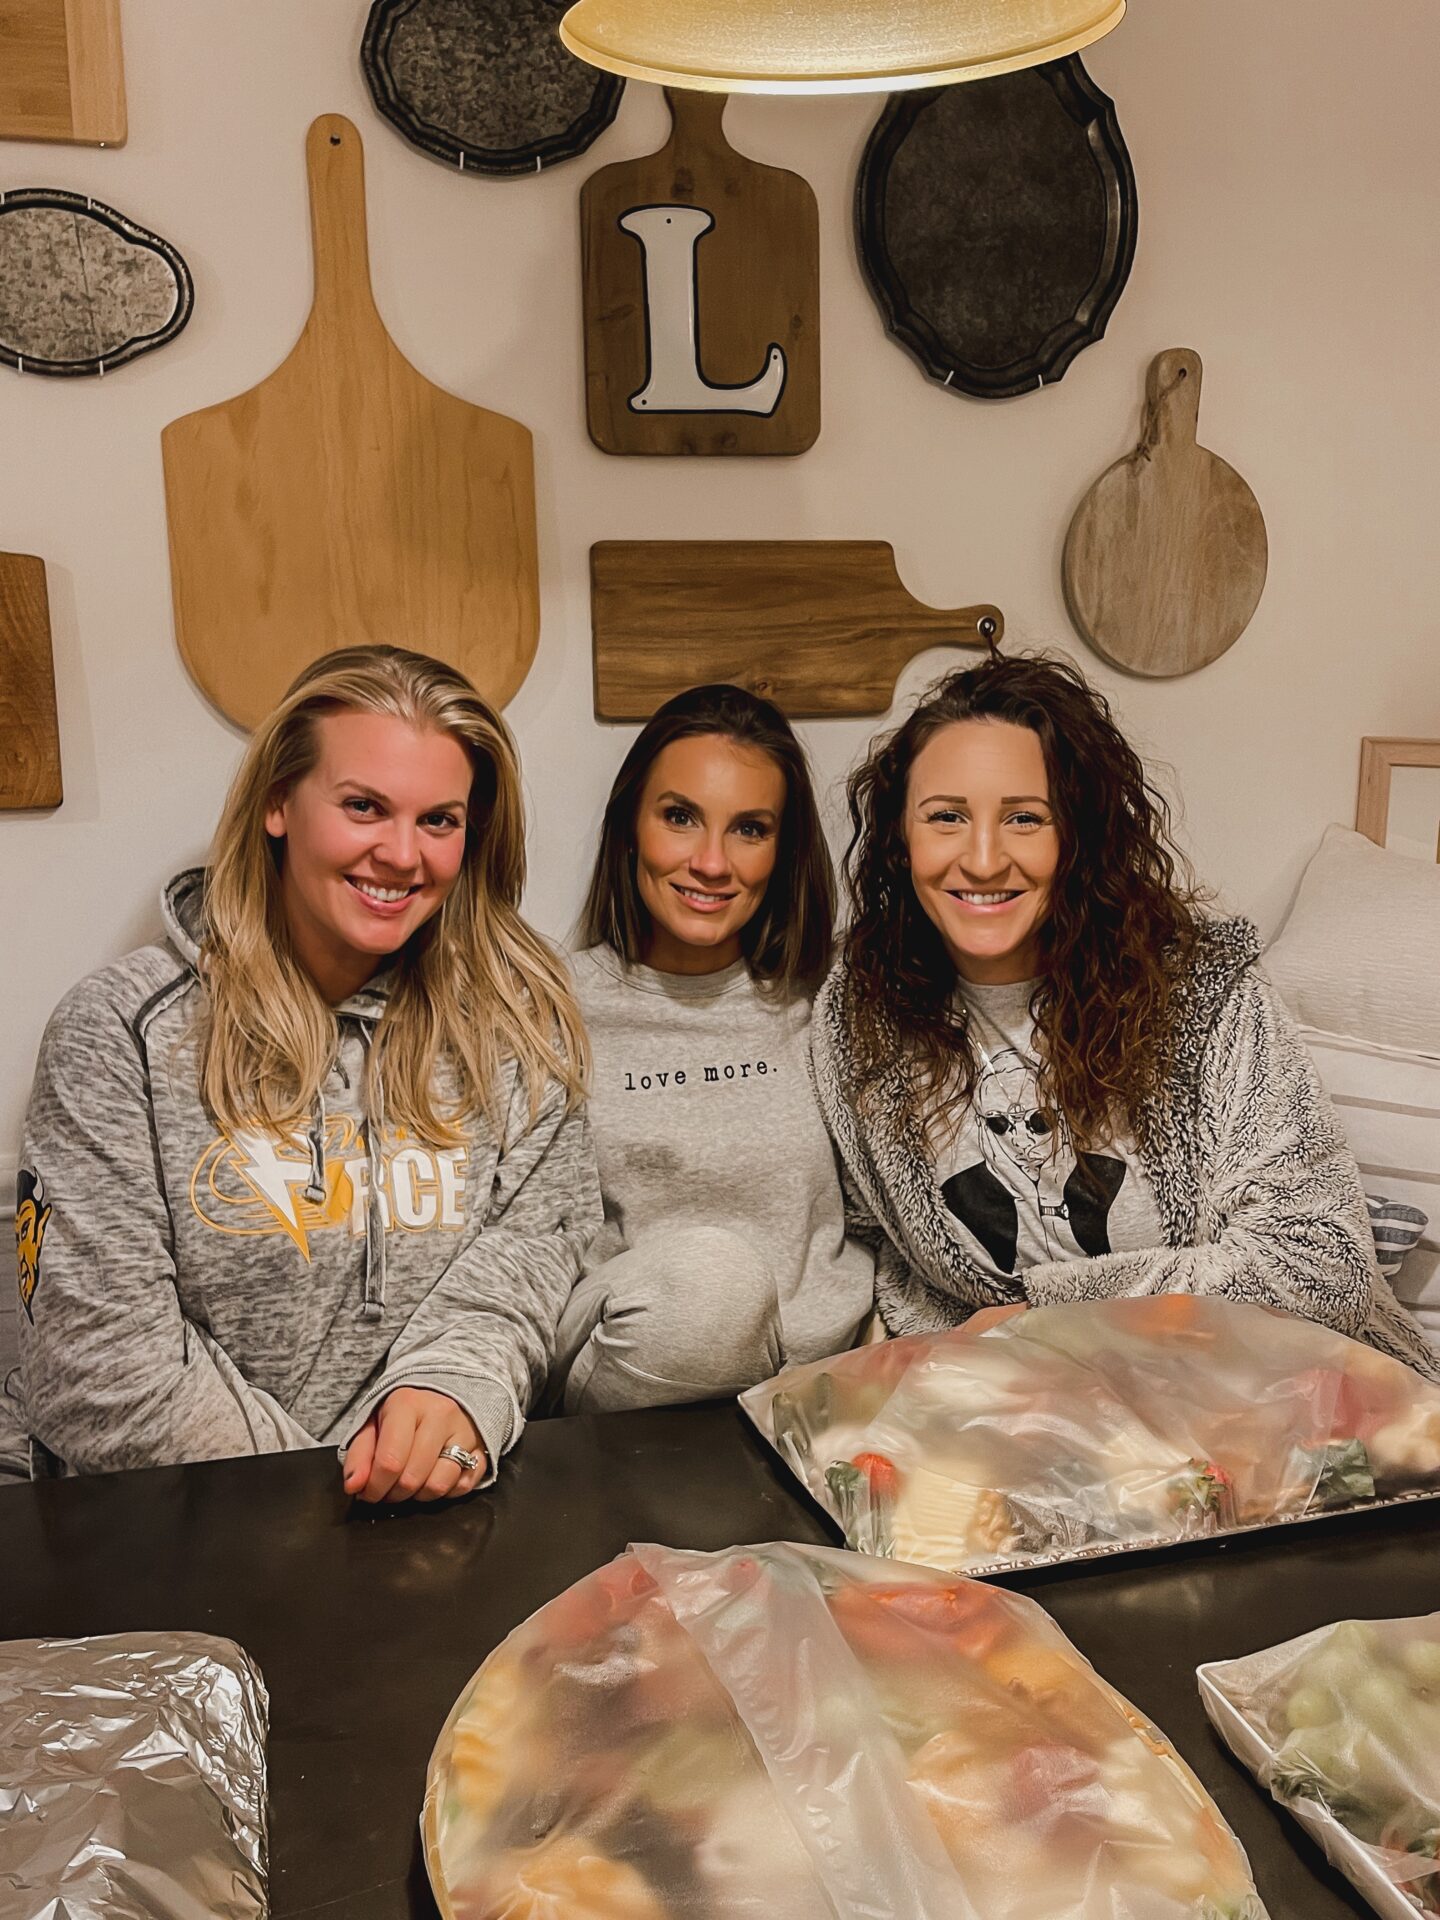 lifestyle blogger Angela Lanter sitting at her kitchen table with her lifelong friends